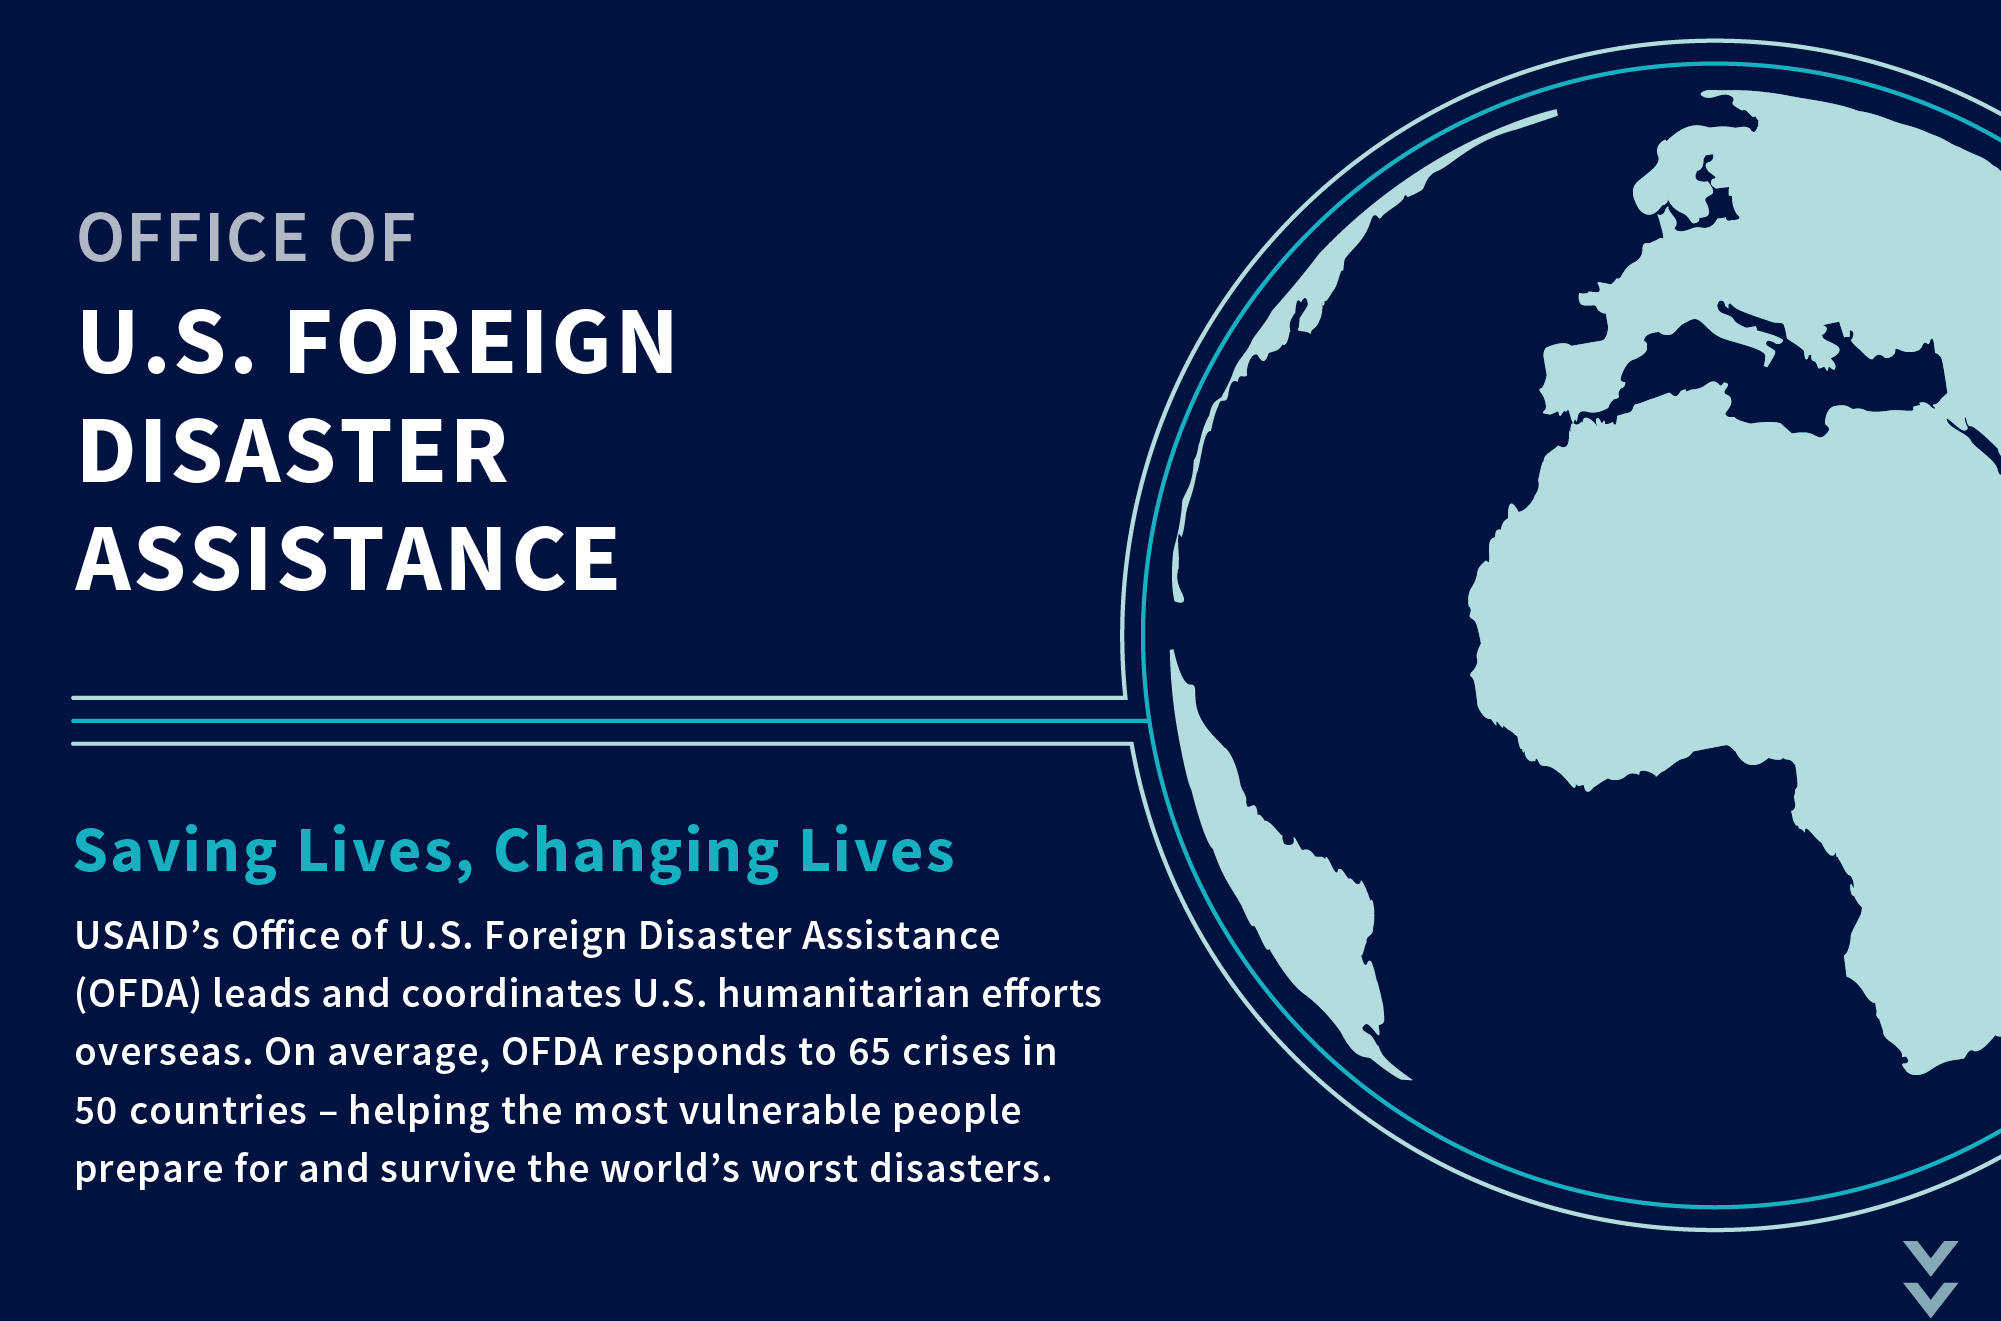 Office of U.S. Foreign Disaster Assistance. Saving Lives, Changing Lives. USAID's Office of Foreign Disaster Assistance (OFDA) leads and coordinates U.S. humanitarian efforts overseas. On average, OFDA responds to 65 crisises in 50 countries - helping the most vulnerable people prepare for and survive the world's worst disasters